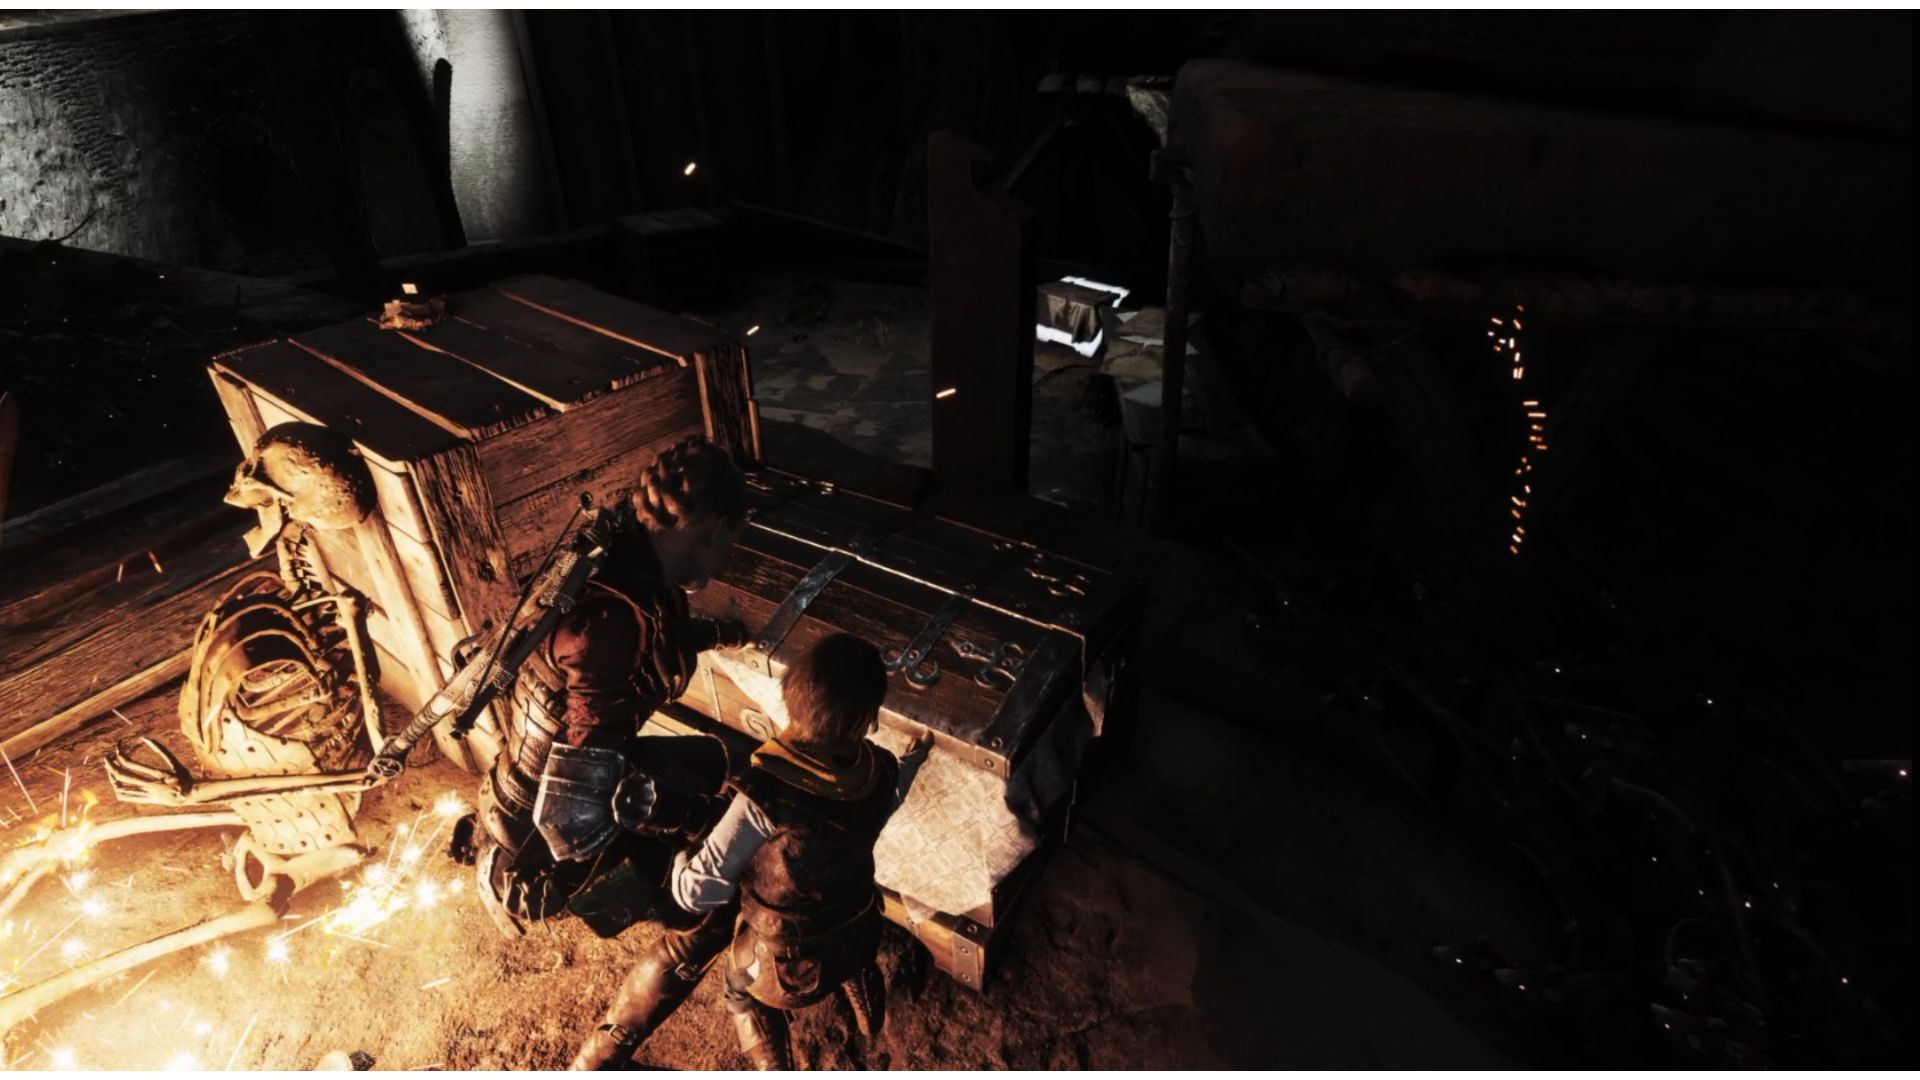 A Plague Tale Requiem Collectibles: The area with the chest can be seen